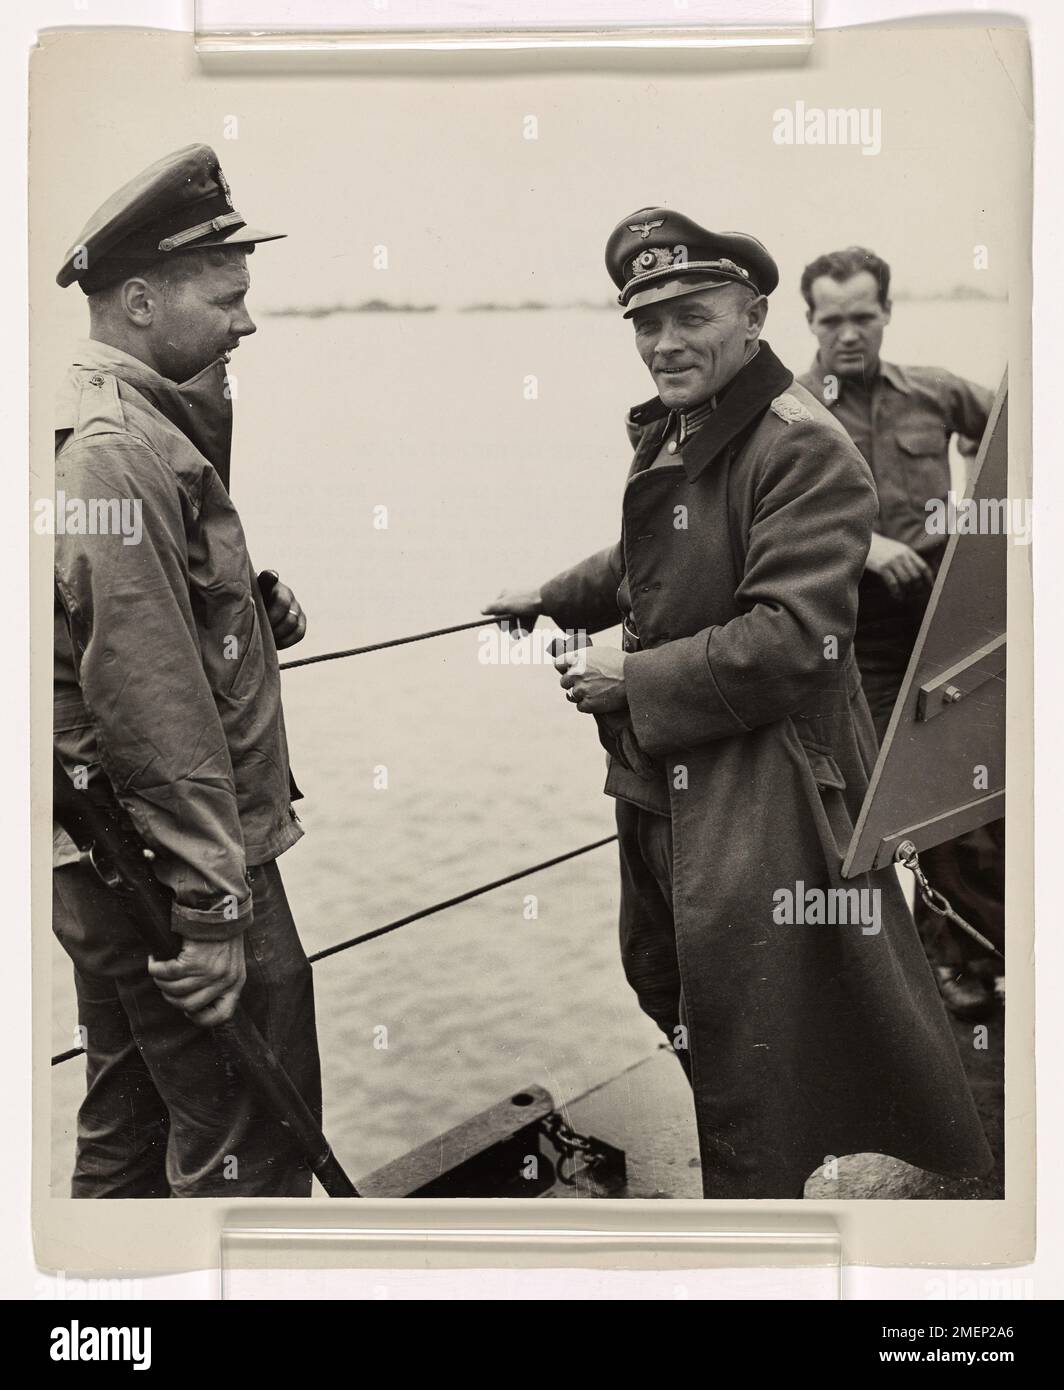 Photograph of Nazi Lieut. Col. Hans Franz Muller (right) Talking With Coast Guard Ensign Axel B. Carlson as the German Is Transported Across the English Channel for Internment in England. Beribboned Nazi Officer Captured at St. Lo. Aboard a Coast Guard-manned LST, Nazi Lieut. Col. Hans Franz Muller (right), four times decorated for his war exploits, talk with Coast Guard Ensign Axel B. Carlson as the German is transported across the English Channel for internment in England. Muller was captured in the battle of St. Lo. He wears the Iron Cross and other medals and a ribbon for participation in Stock Photo